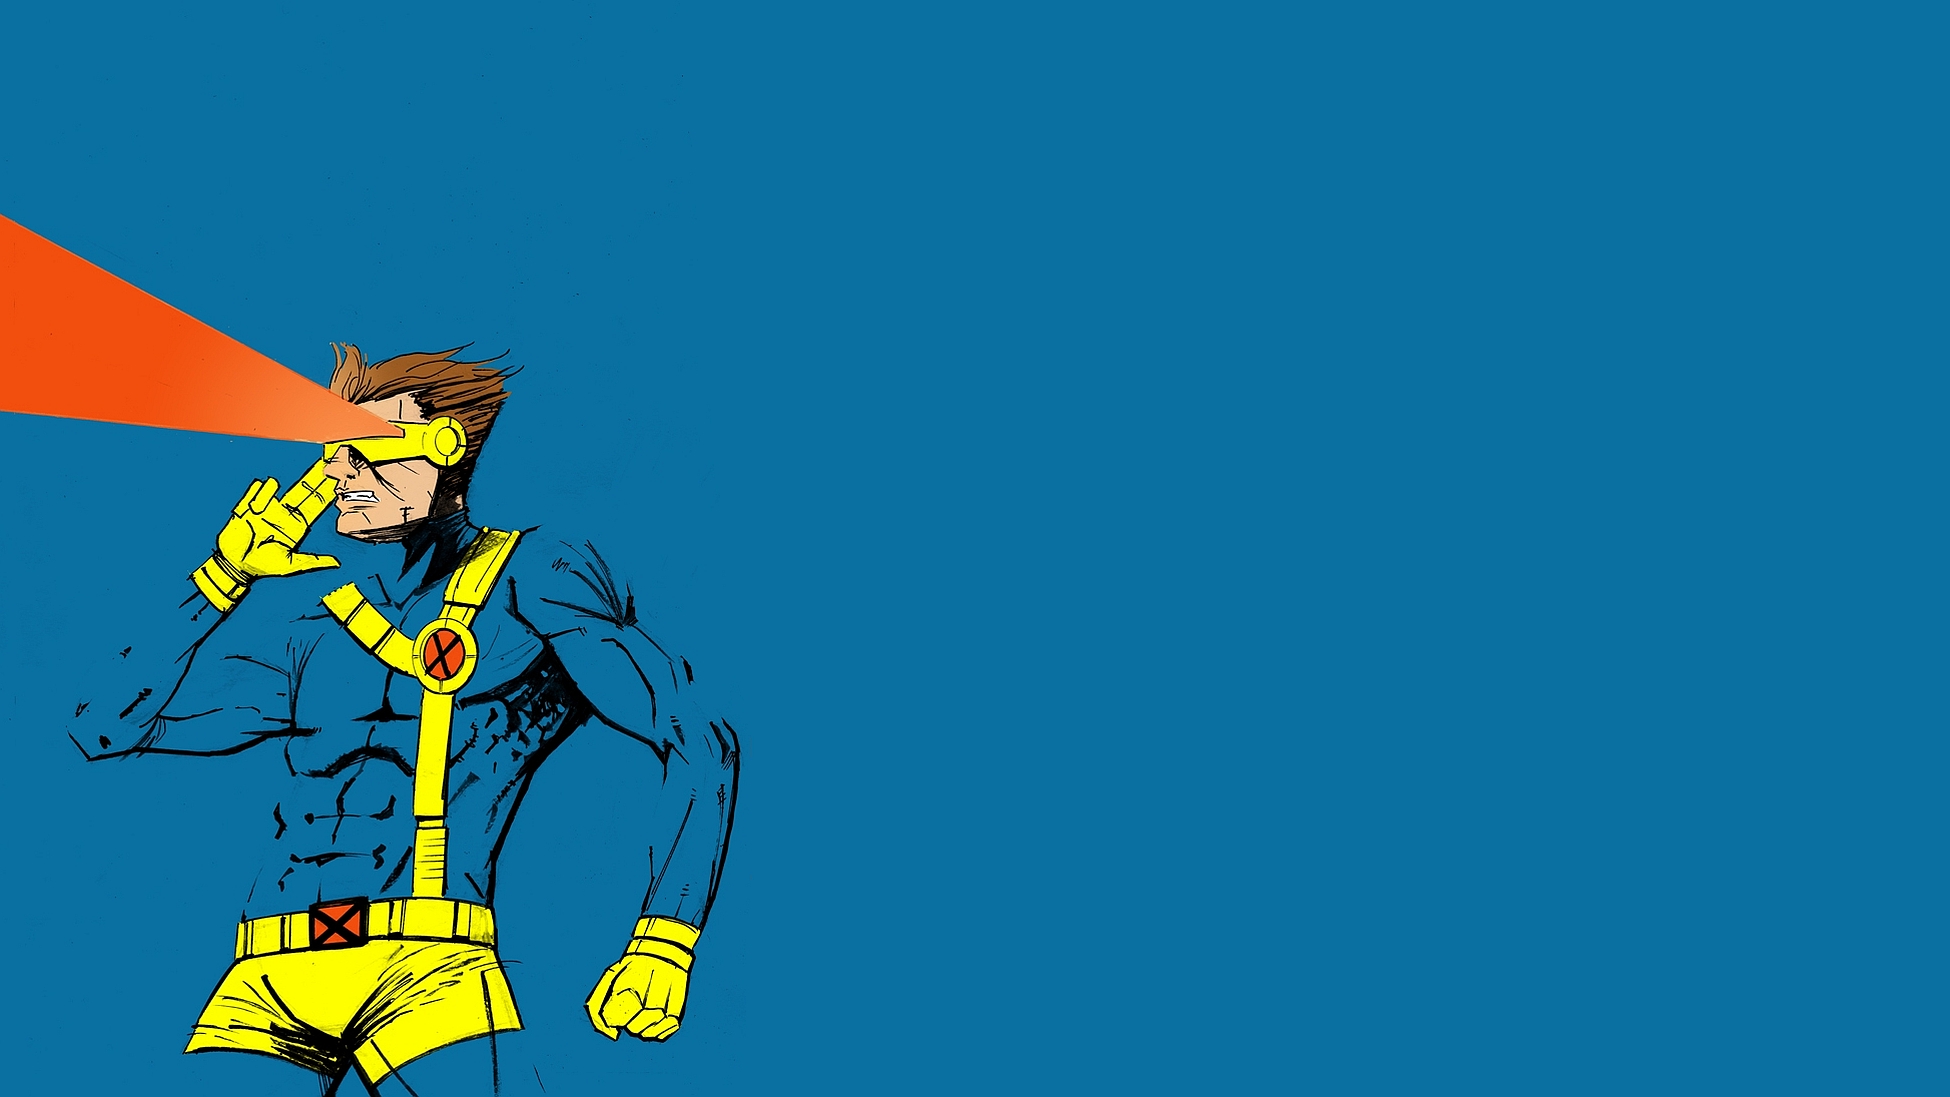 Cyclops marvel ics hd papers and backgrounds